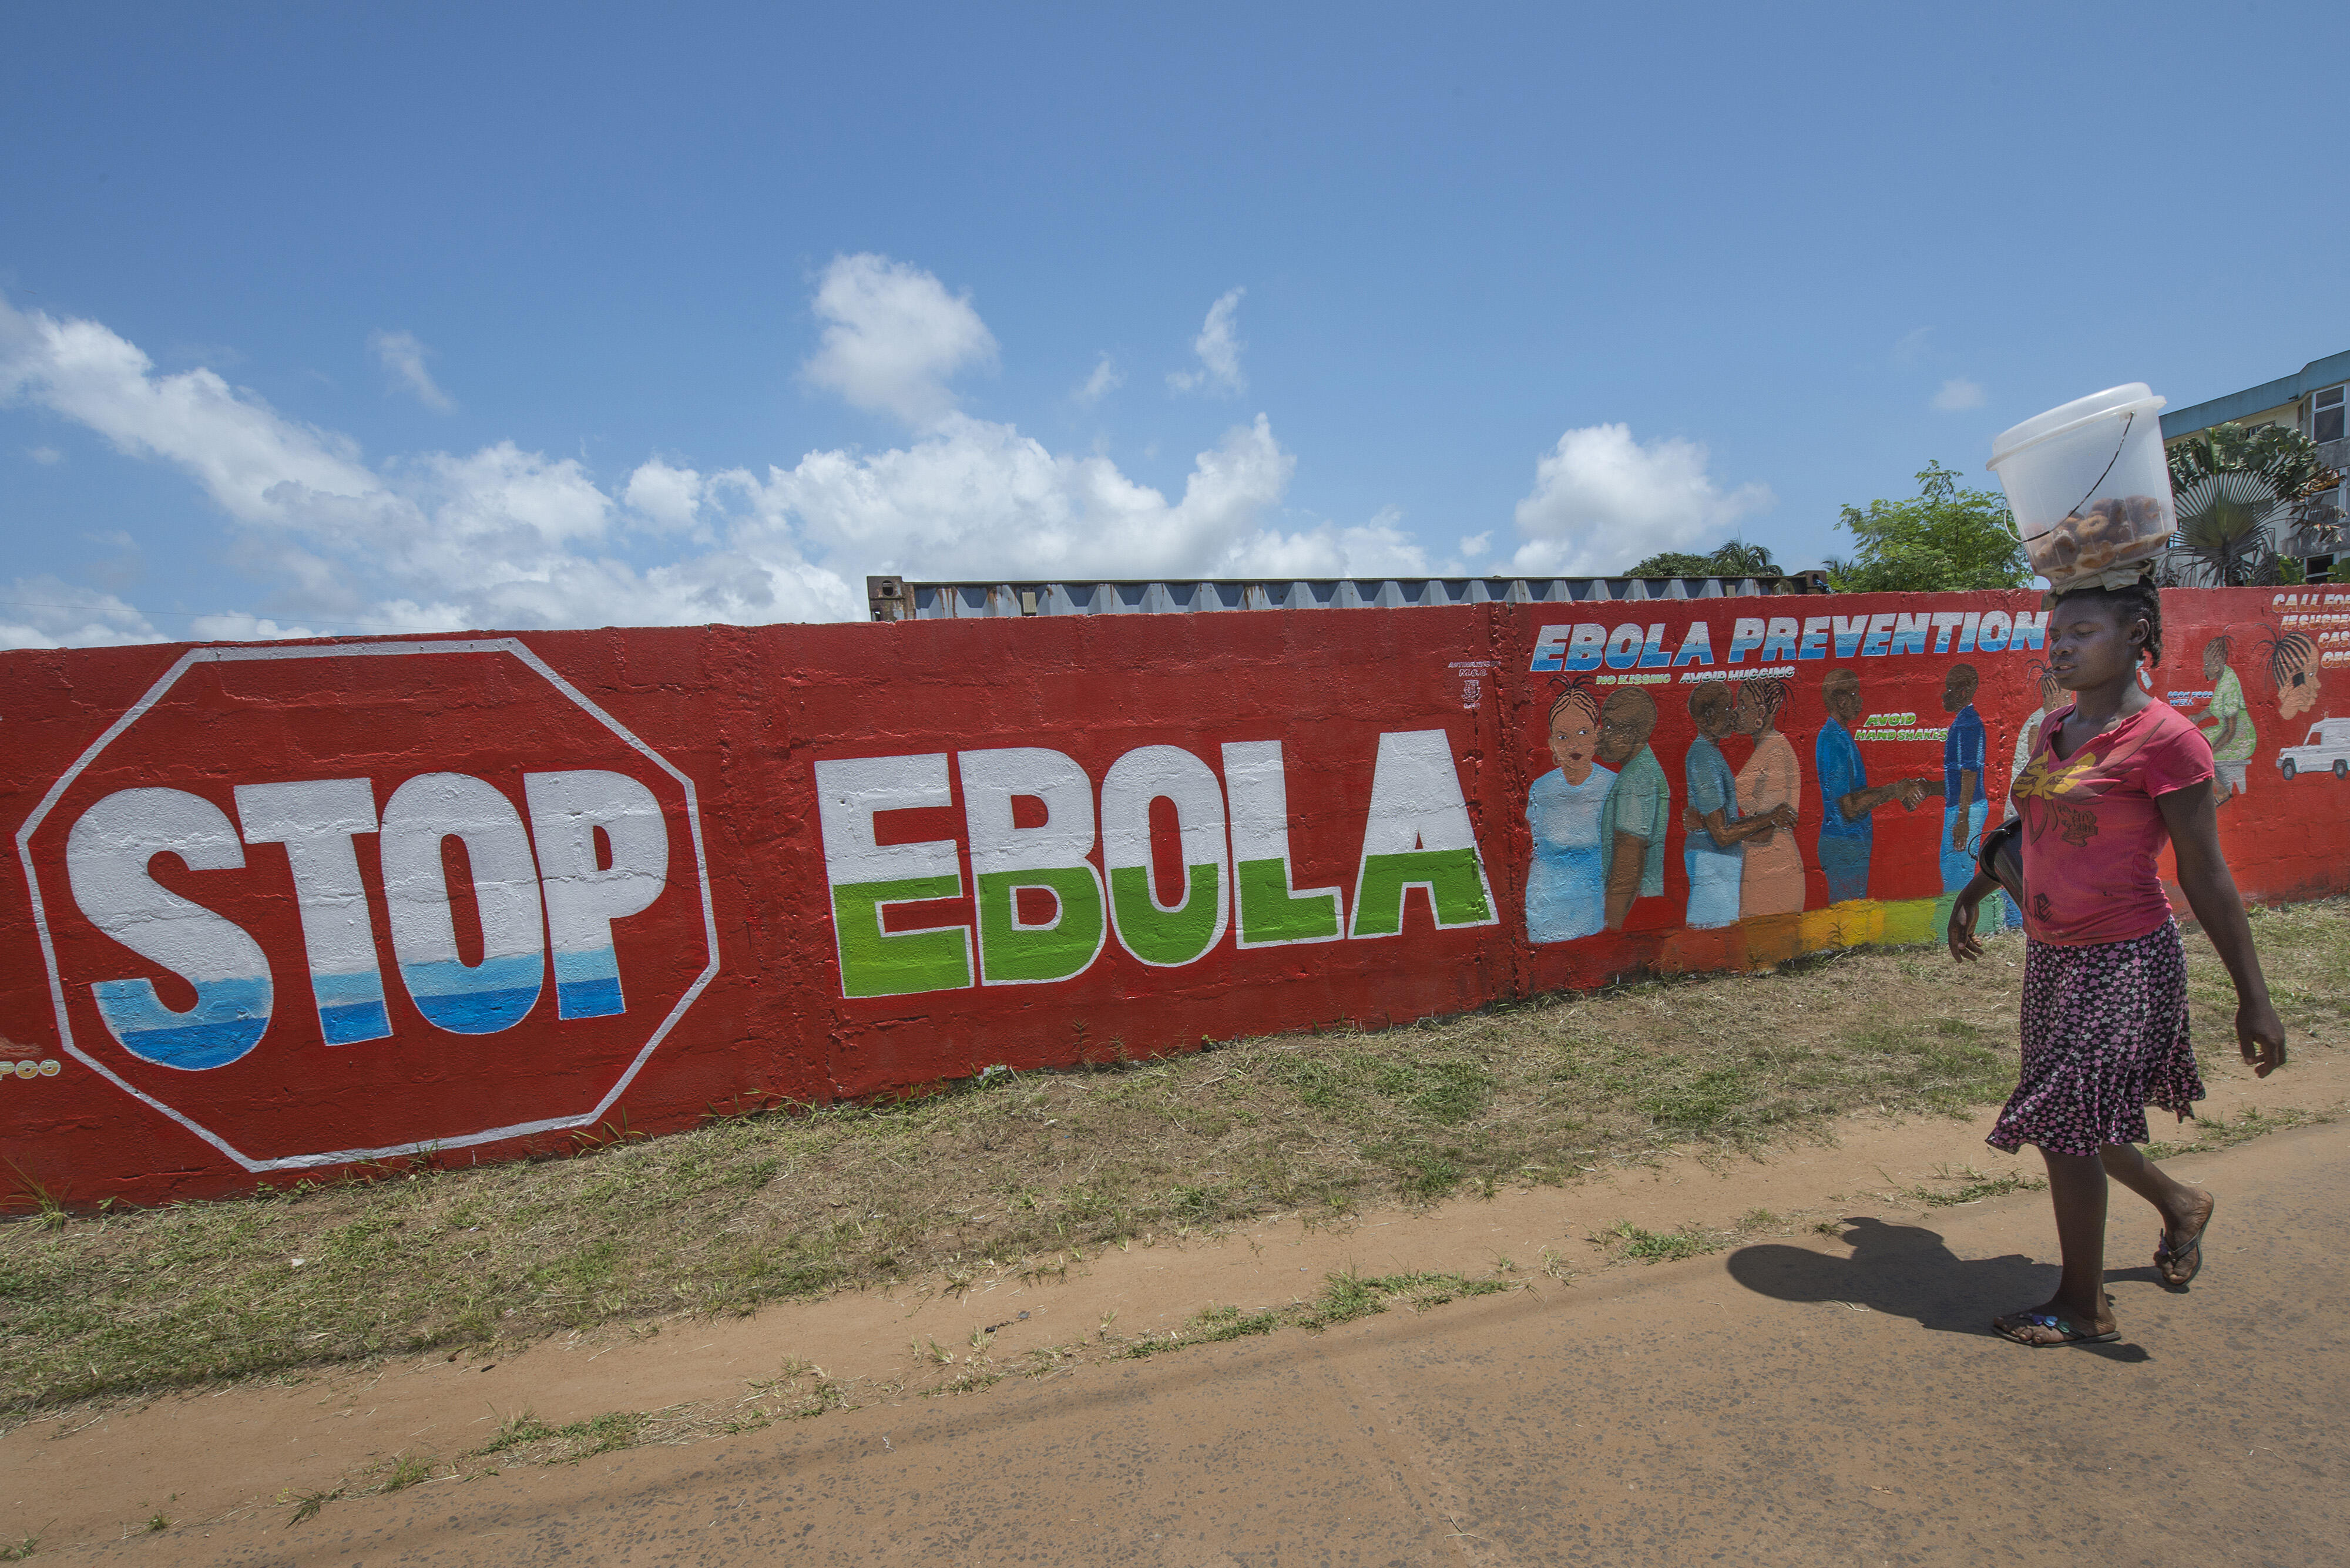 A brightly painted mural in Monrovia, Liberia reads "Stop Ebola"